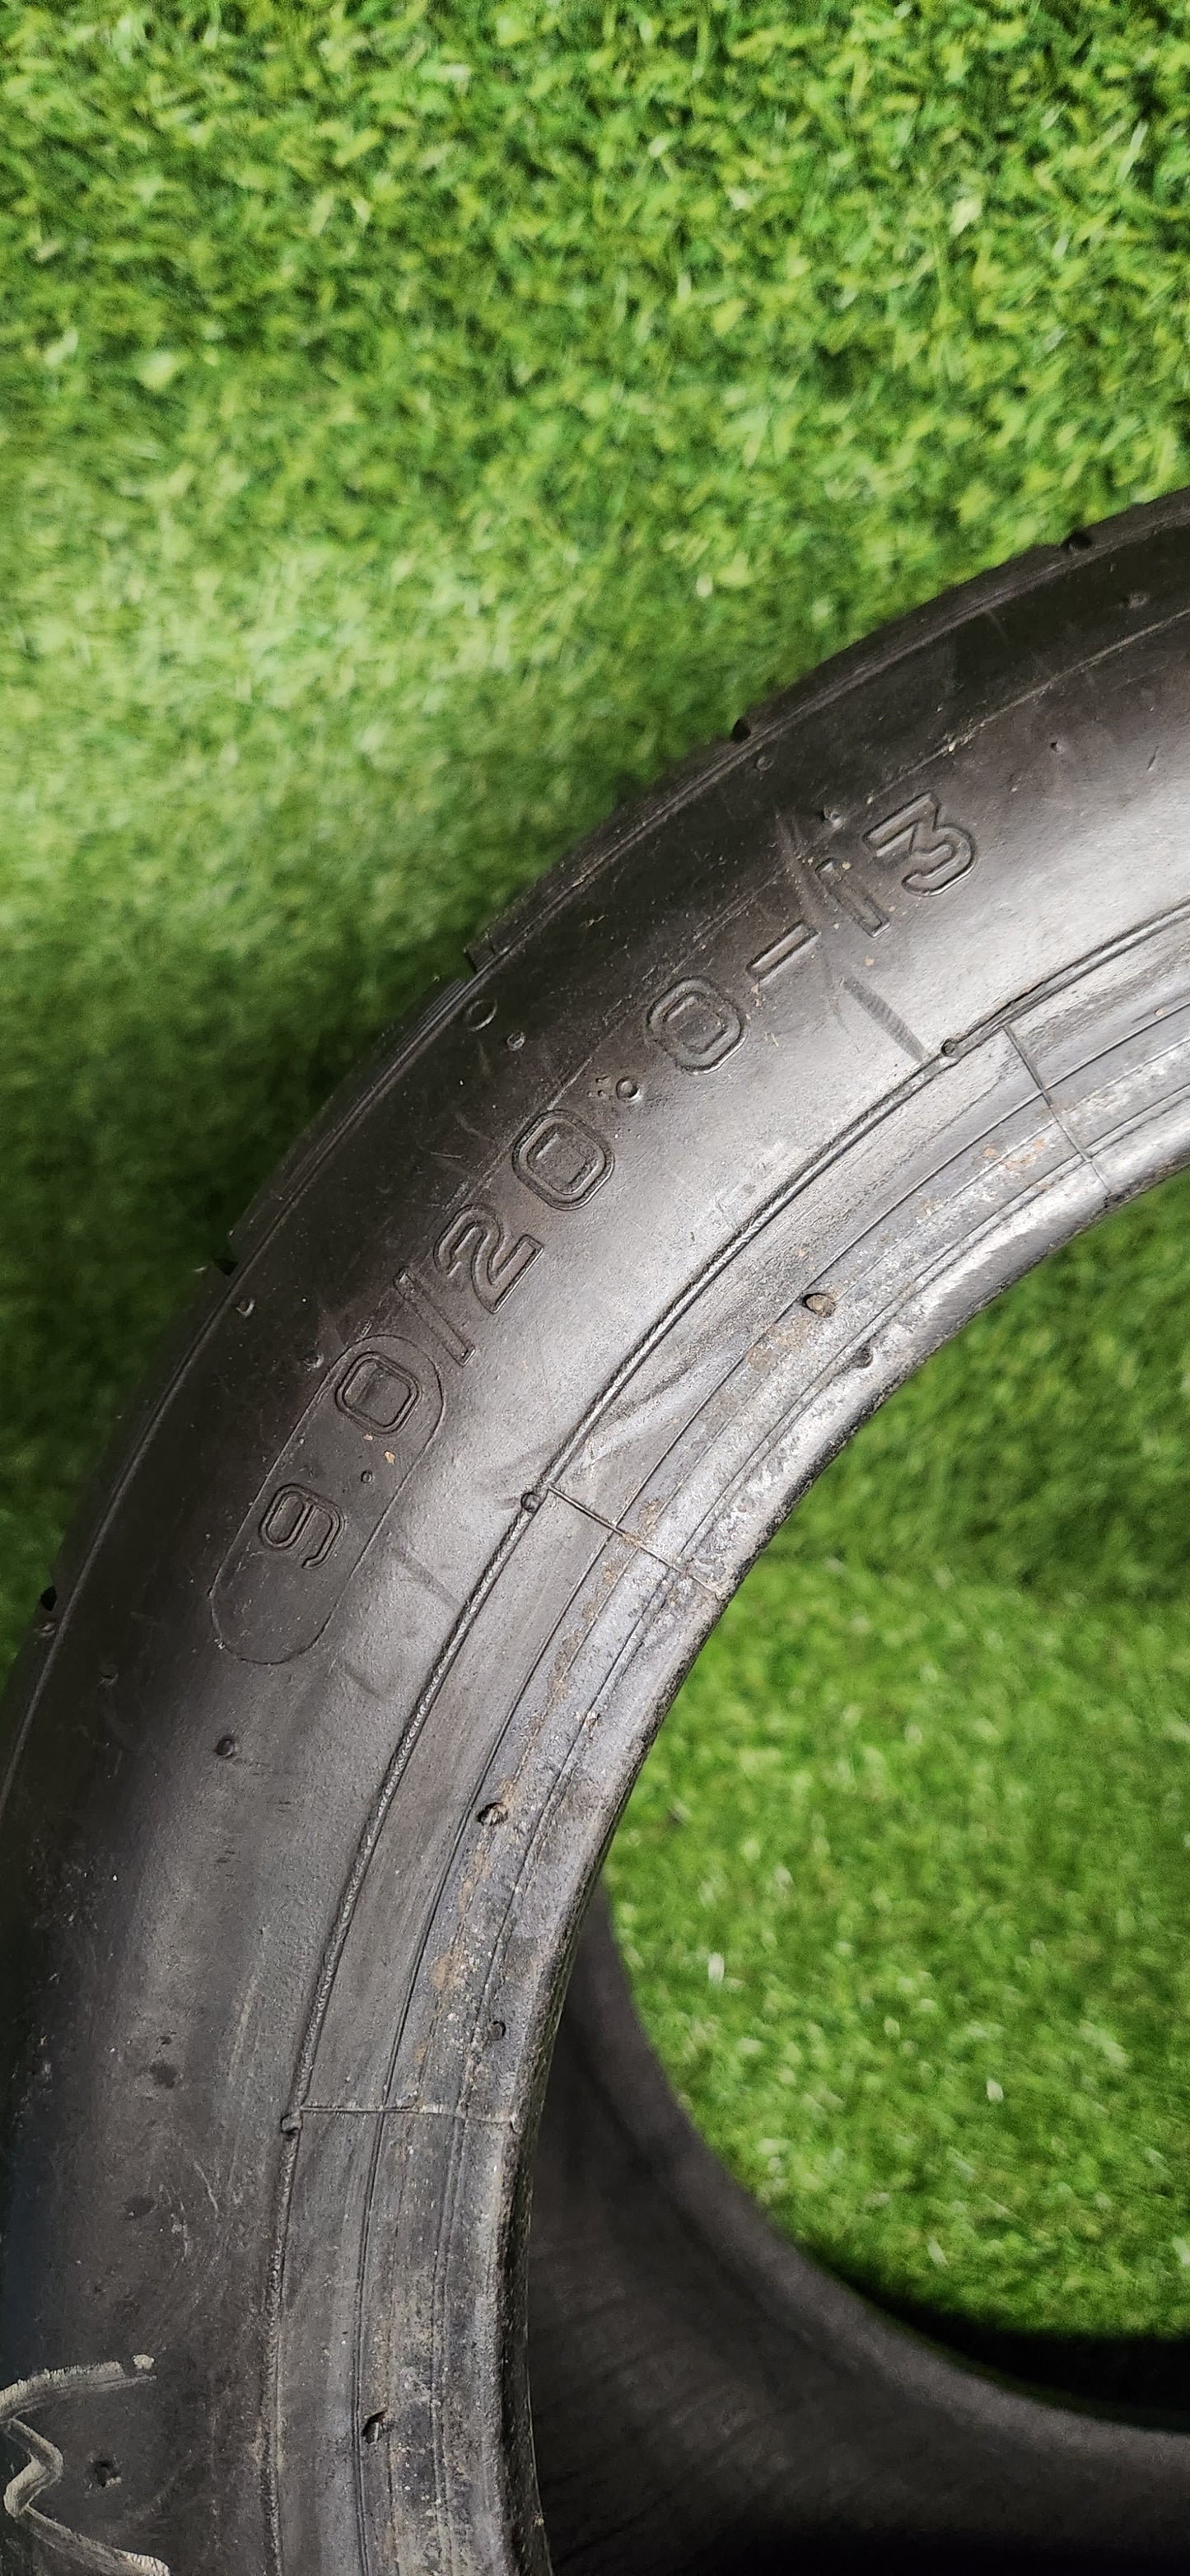 Avon 9.0/20.0/13 Wet Racing Tyres. One only